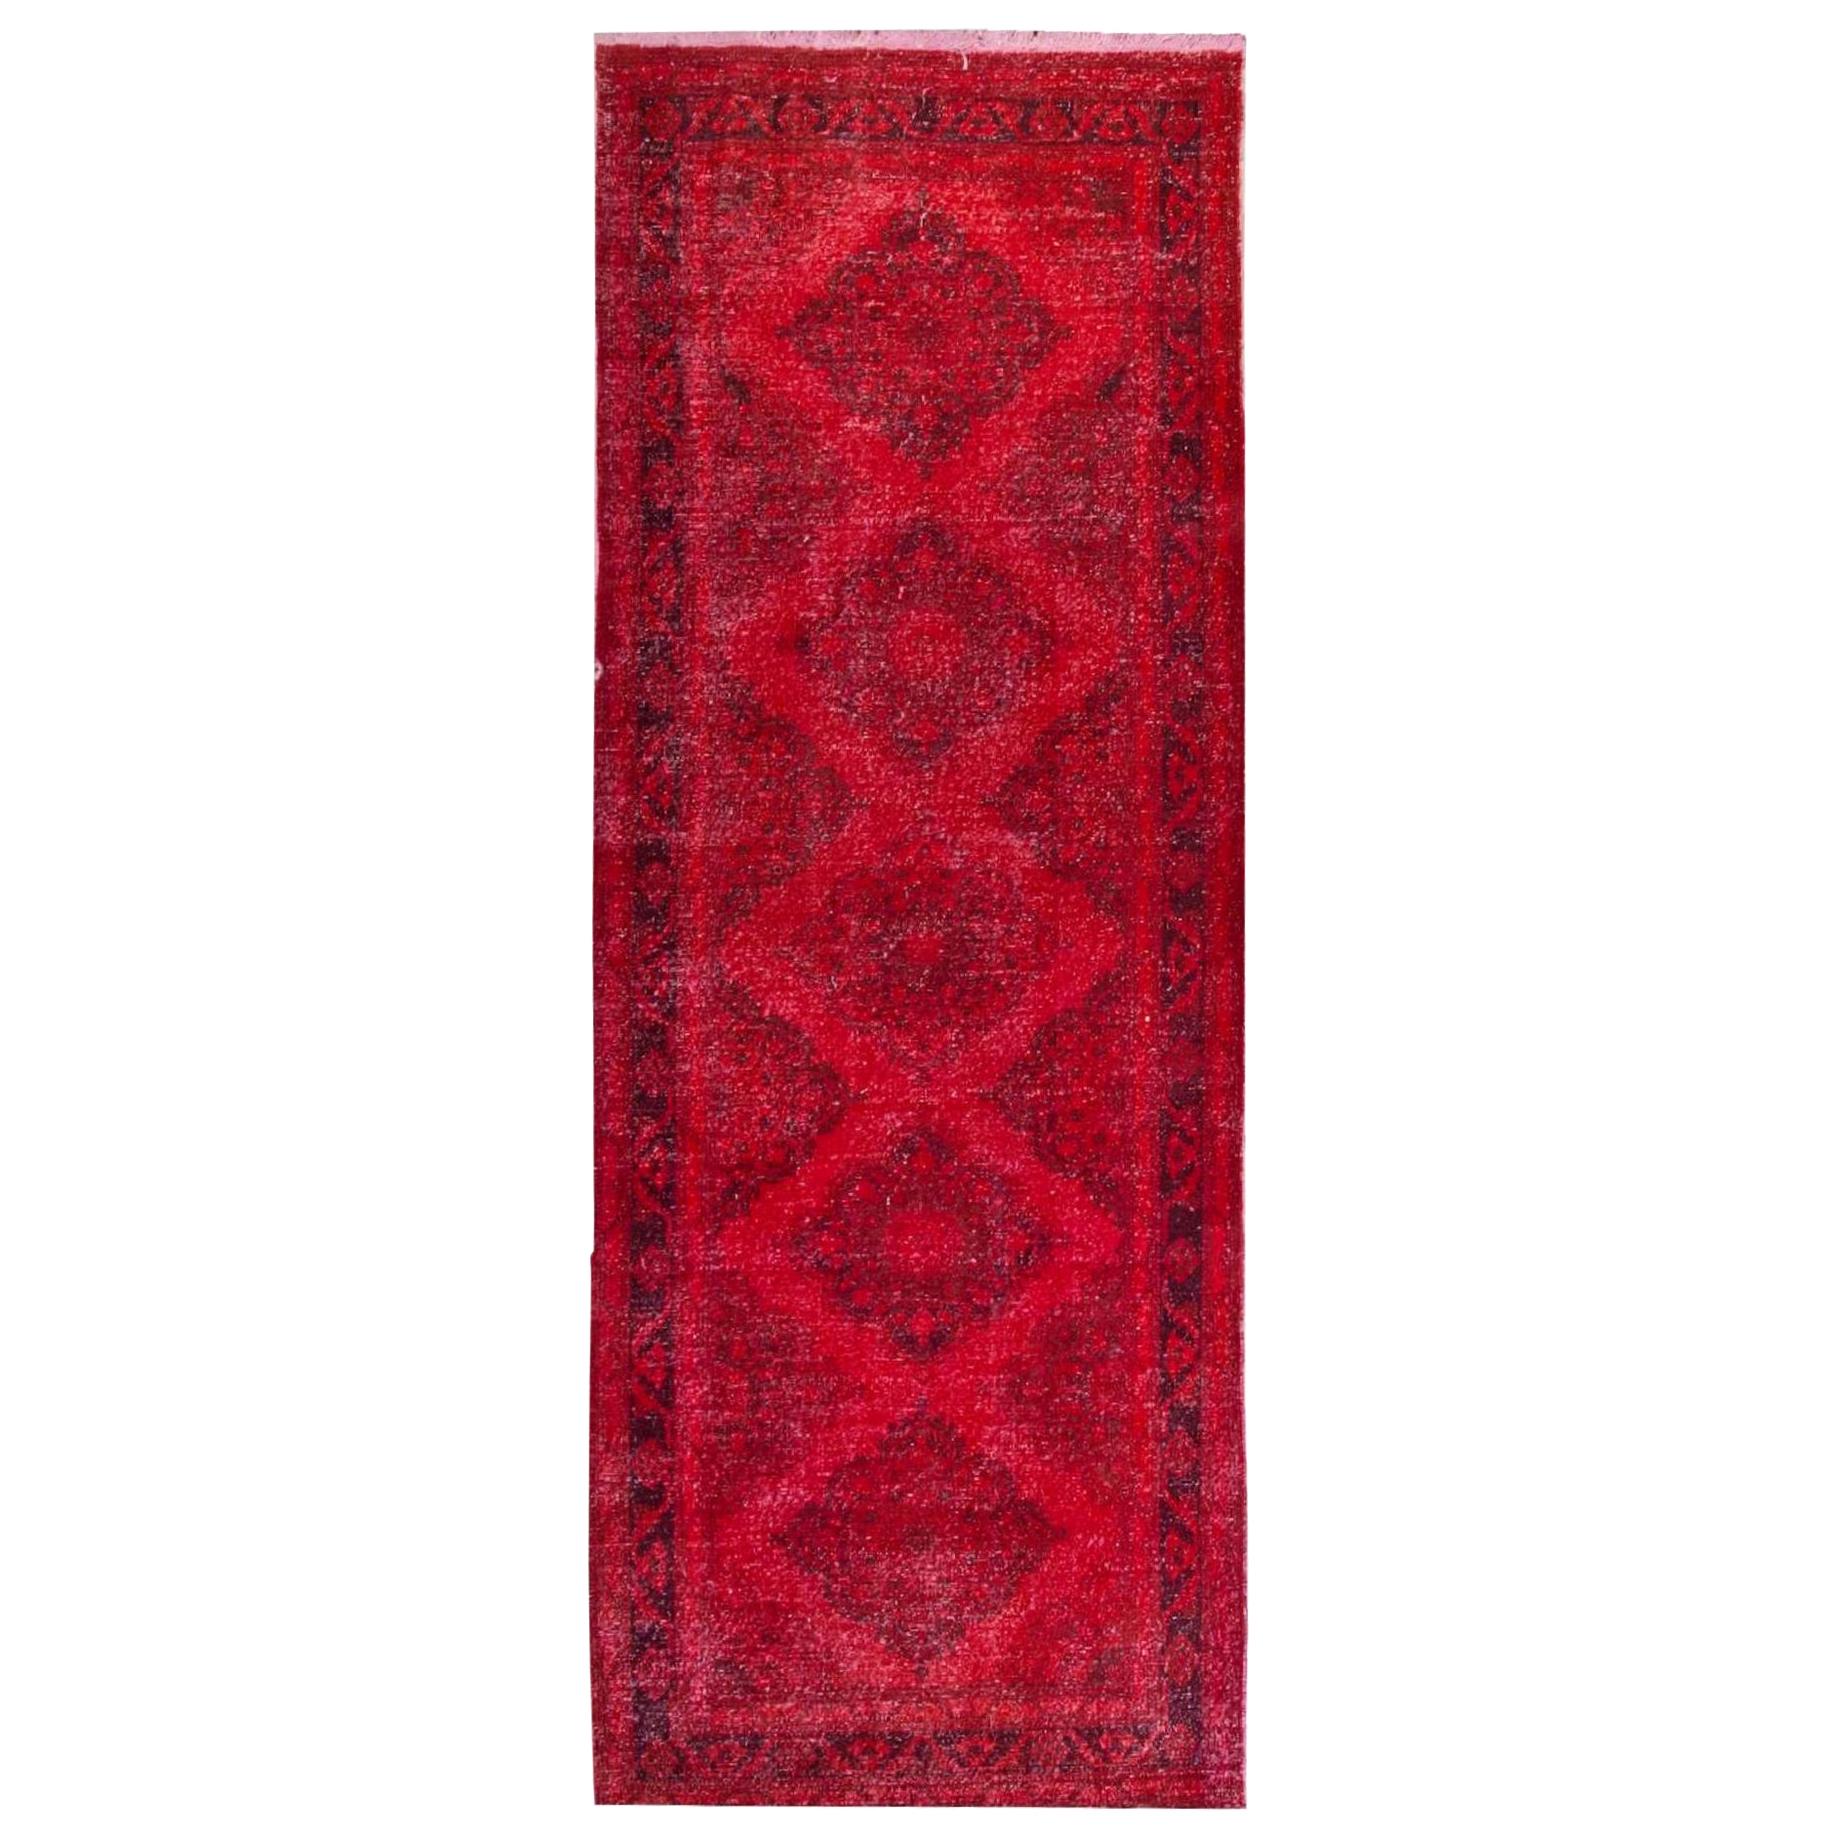 4.6x12.7 Ft Vintage Turkish Hallway Runner Rug dyed in Red 4 Modern Interiors For Sale